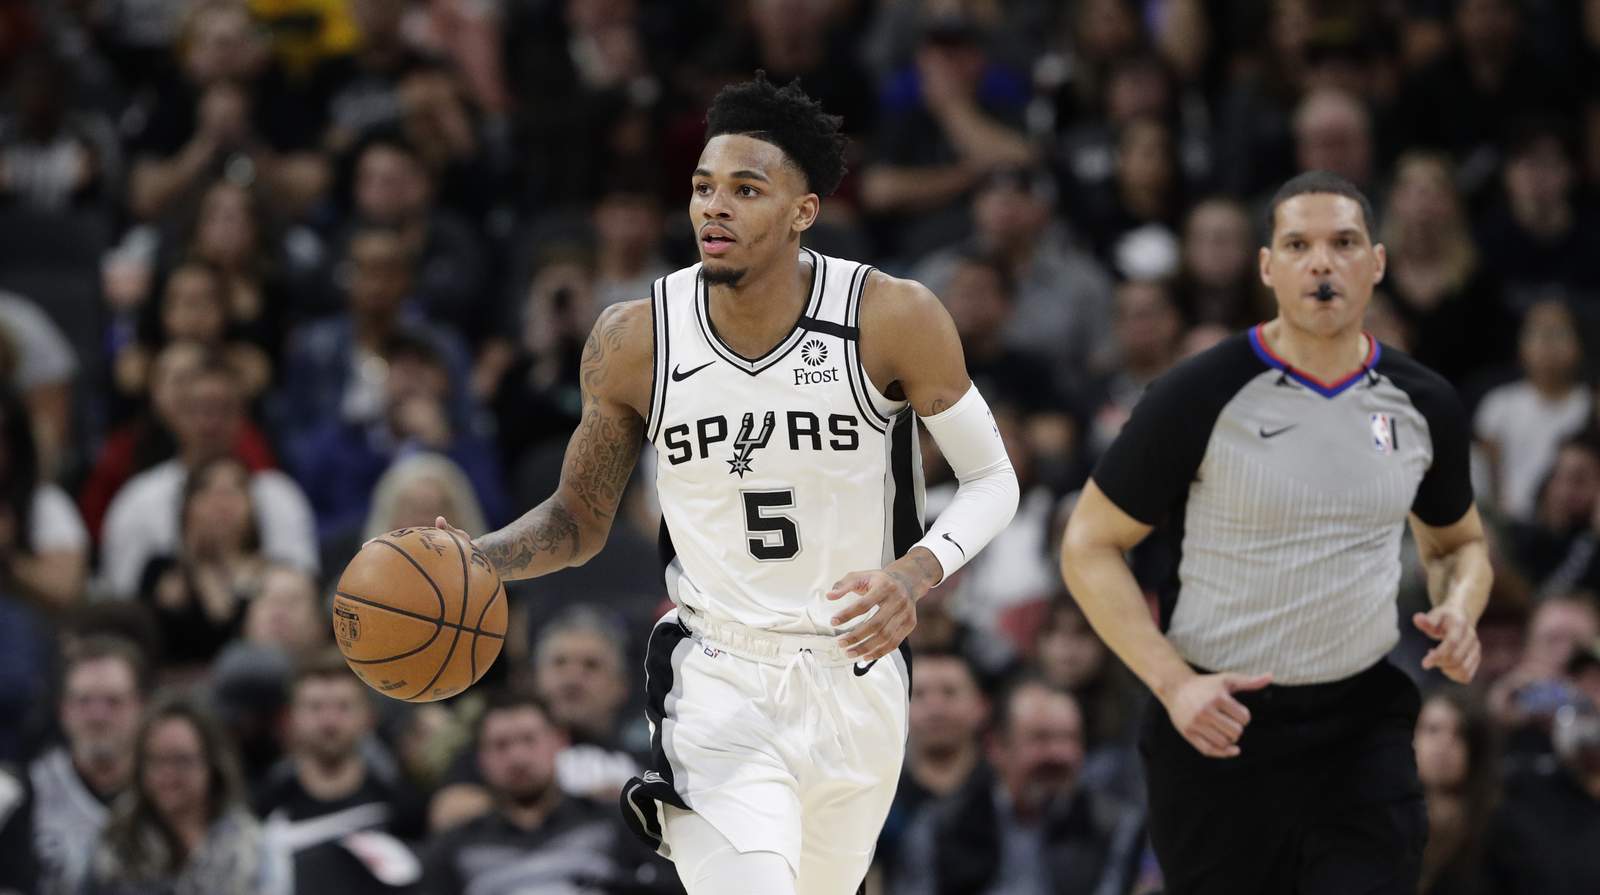 Spurs Dejounte Murray opens up about tough upbringing, being labeled a gang member during NBA draft